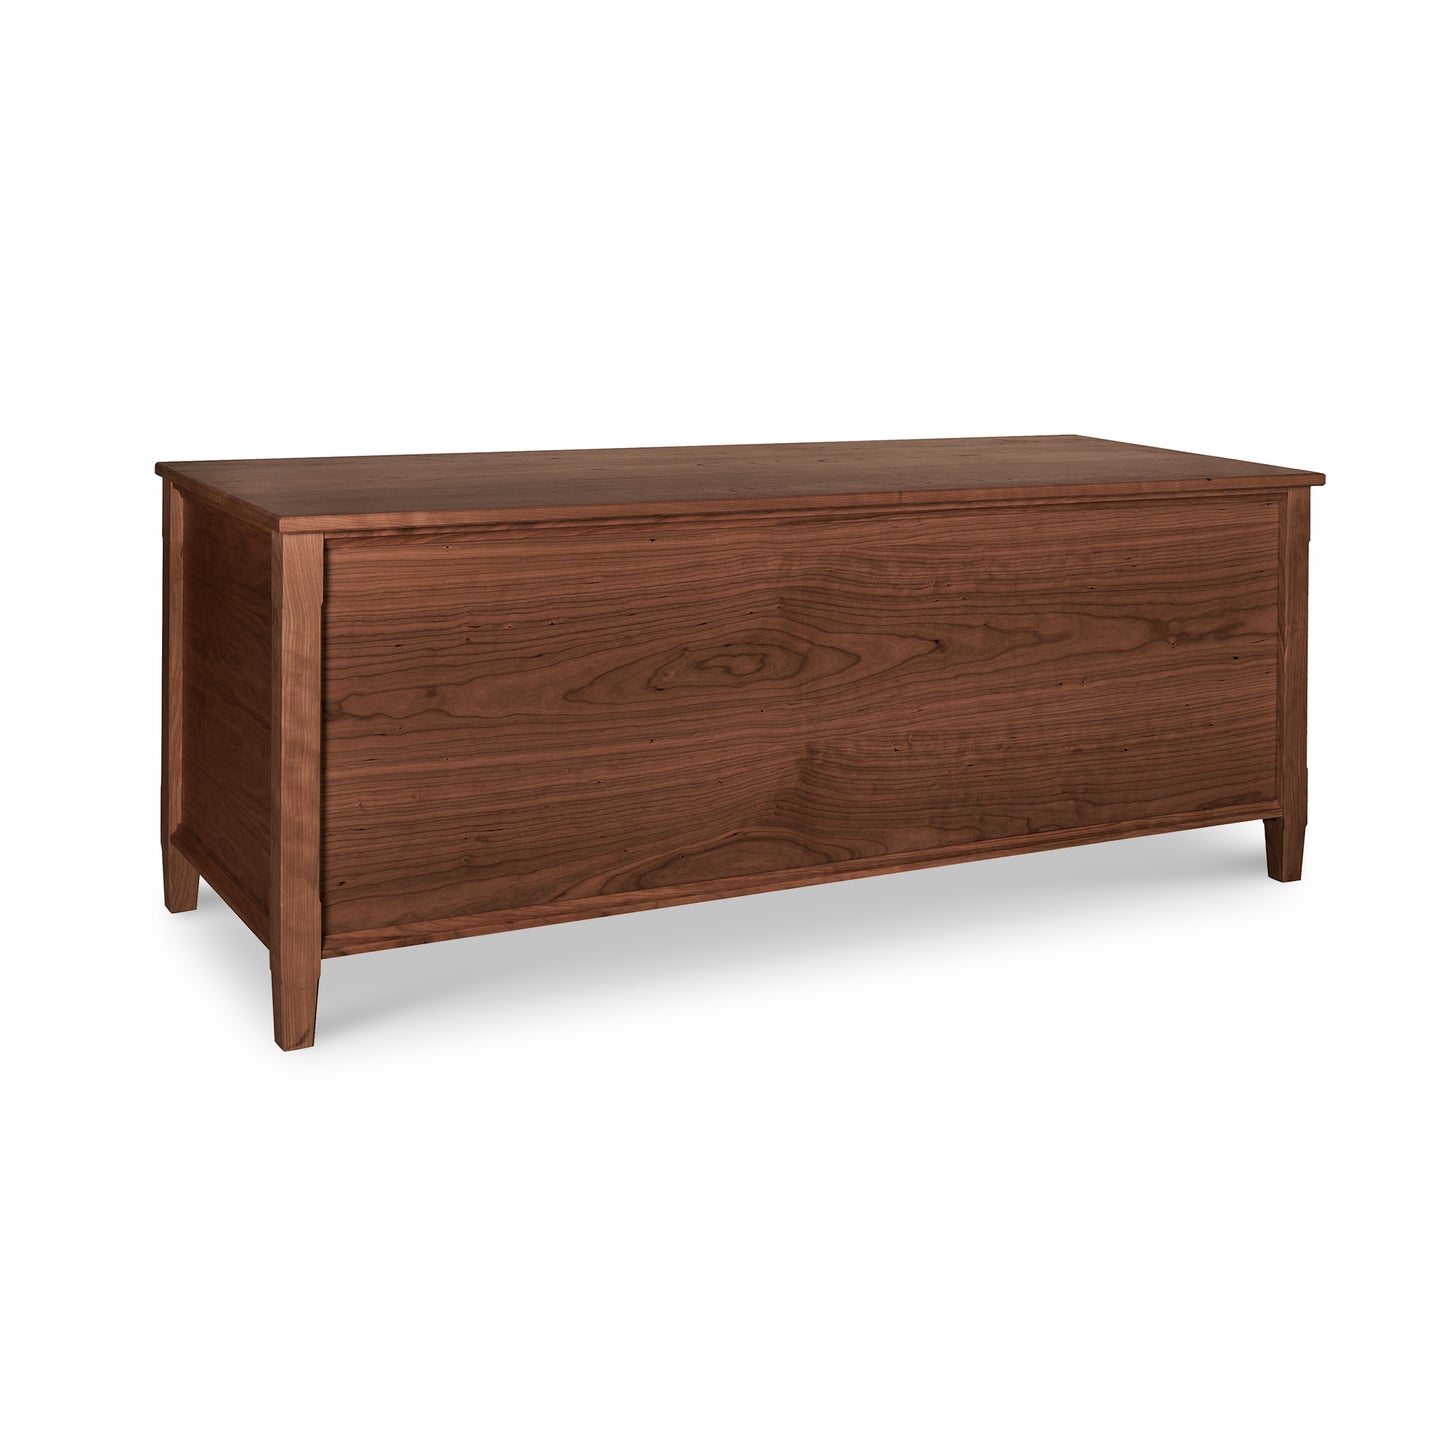 A luxury Maple Corner Woodworks Vermont Shaker Blanket Chest, crafted from eco-friendly wood, showcased on a white background.